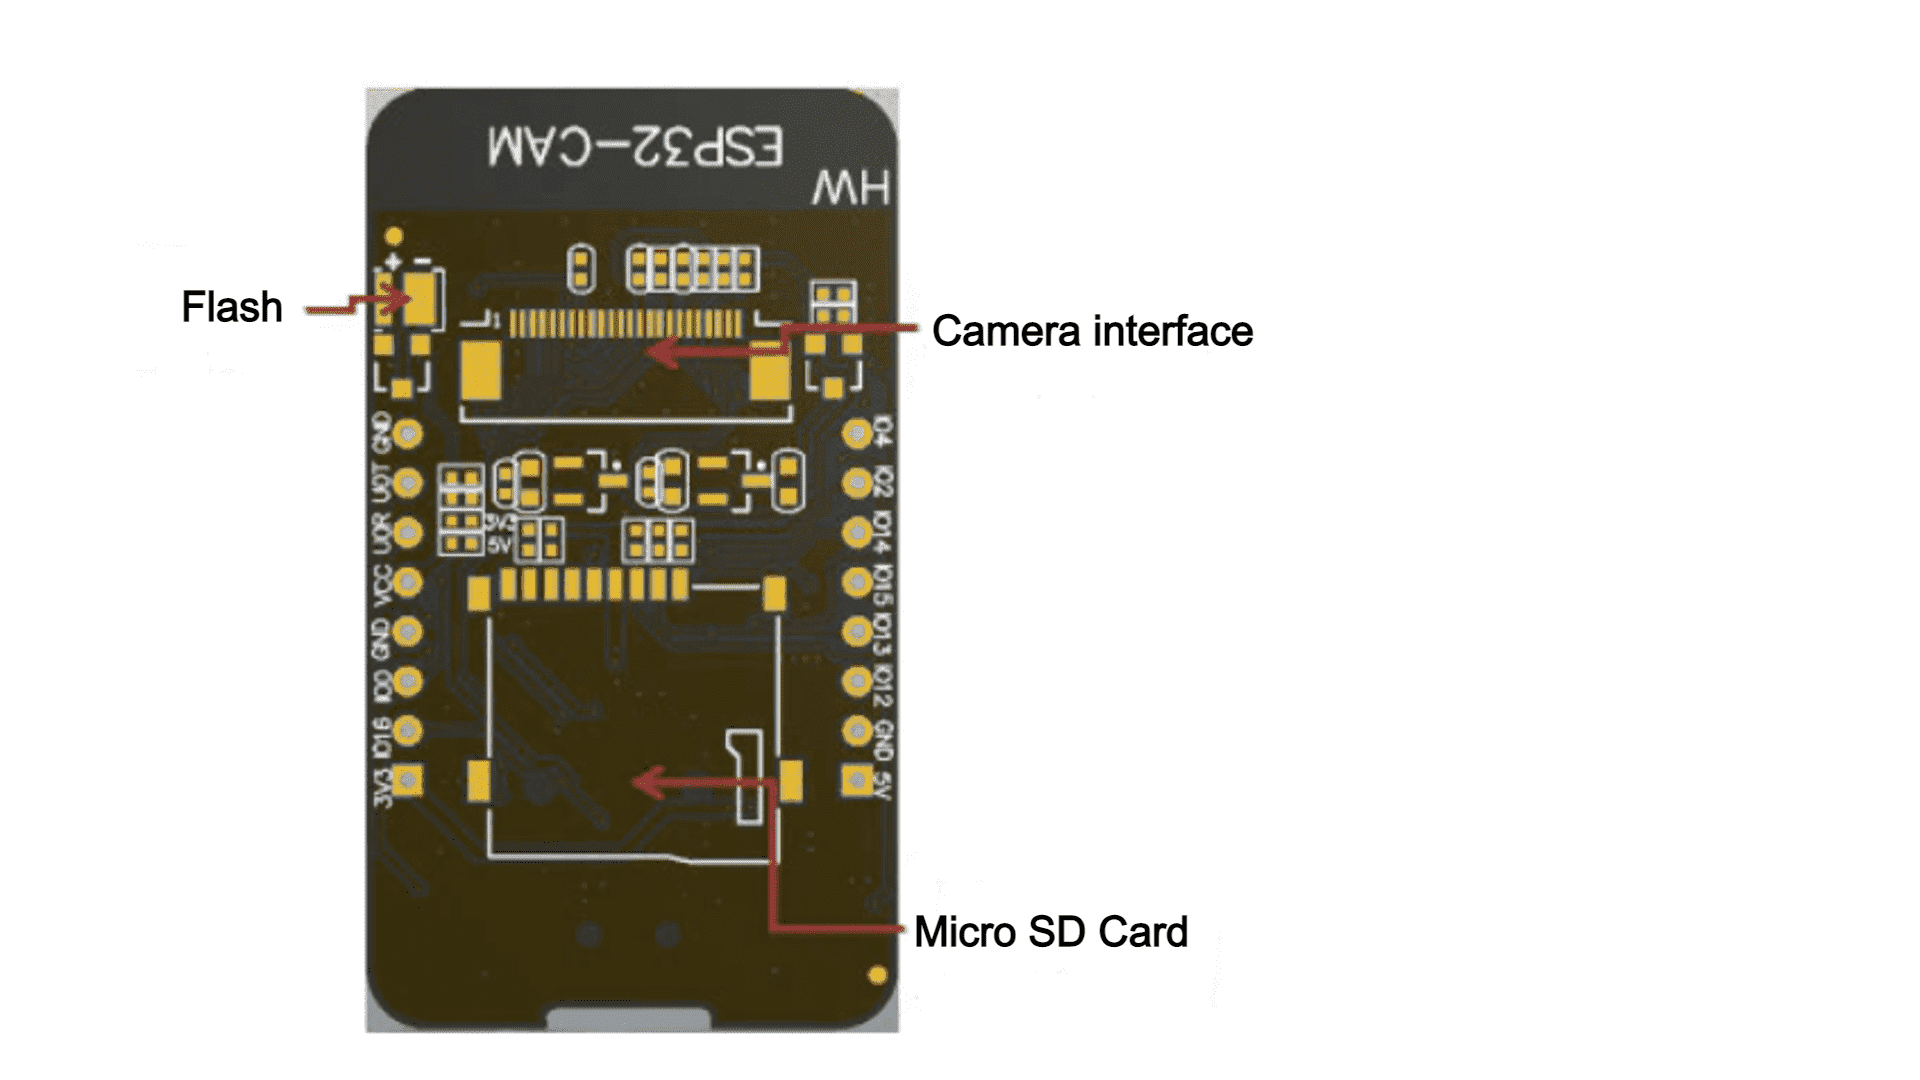 Getting Started with ESP32-CAM